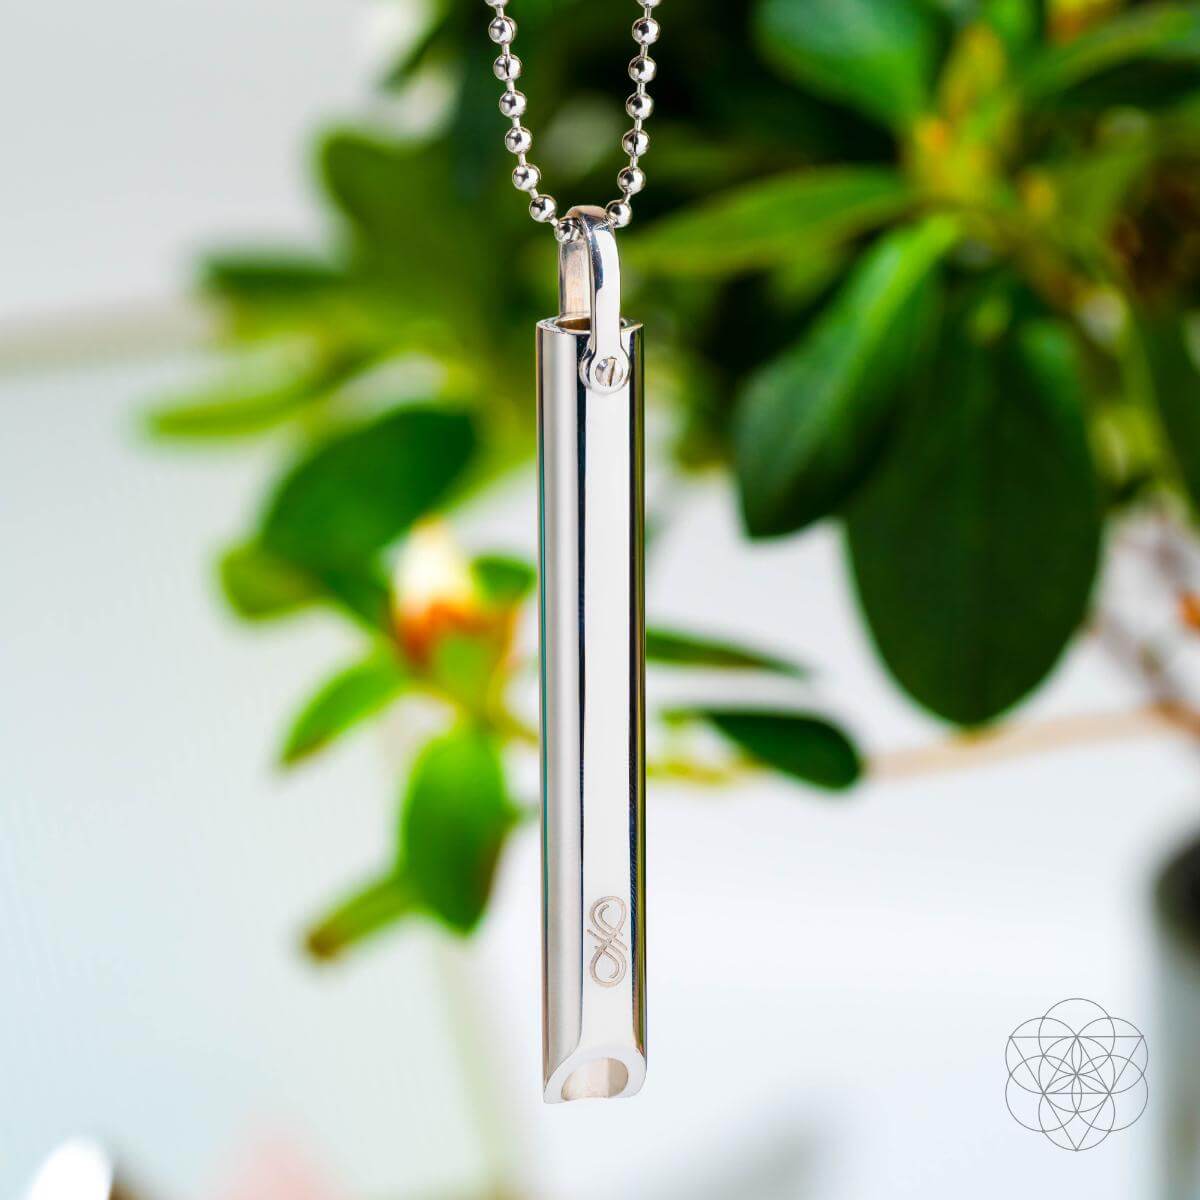 BREATHE. and Cycle Breaker - Mindfulness Breathing Necklaces